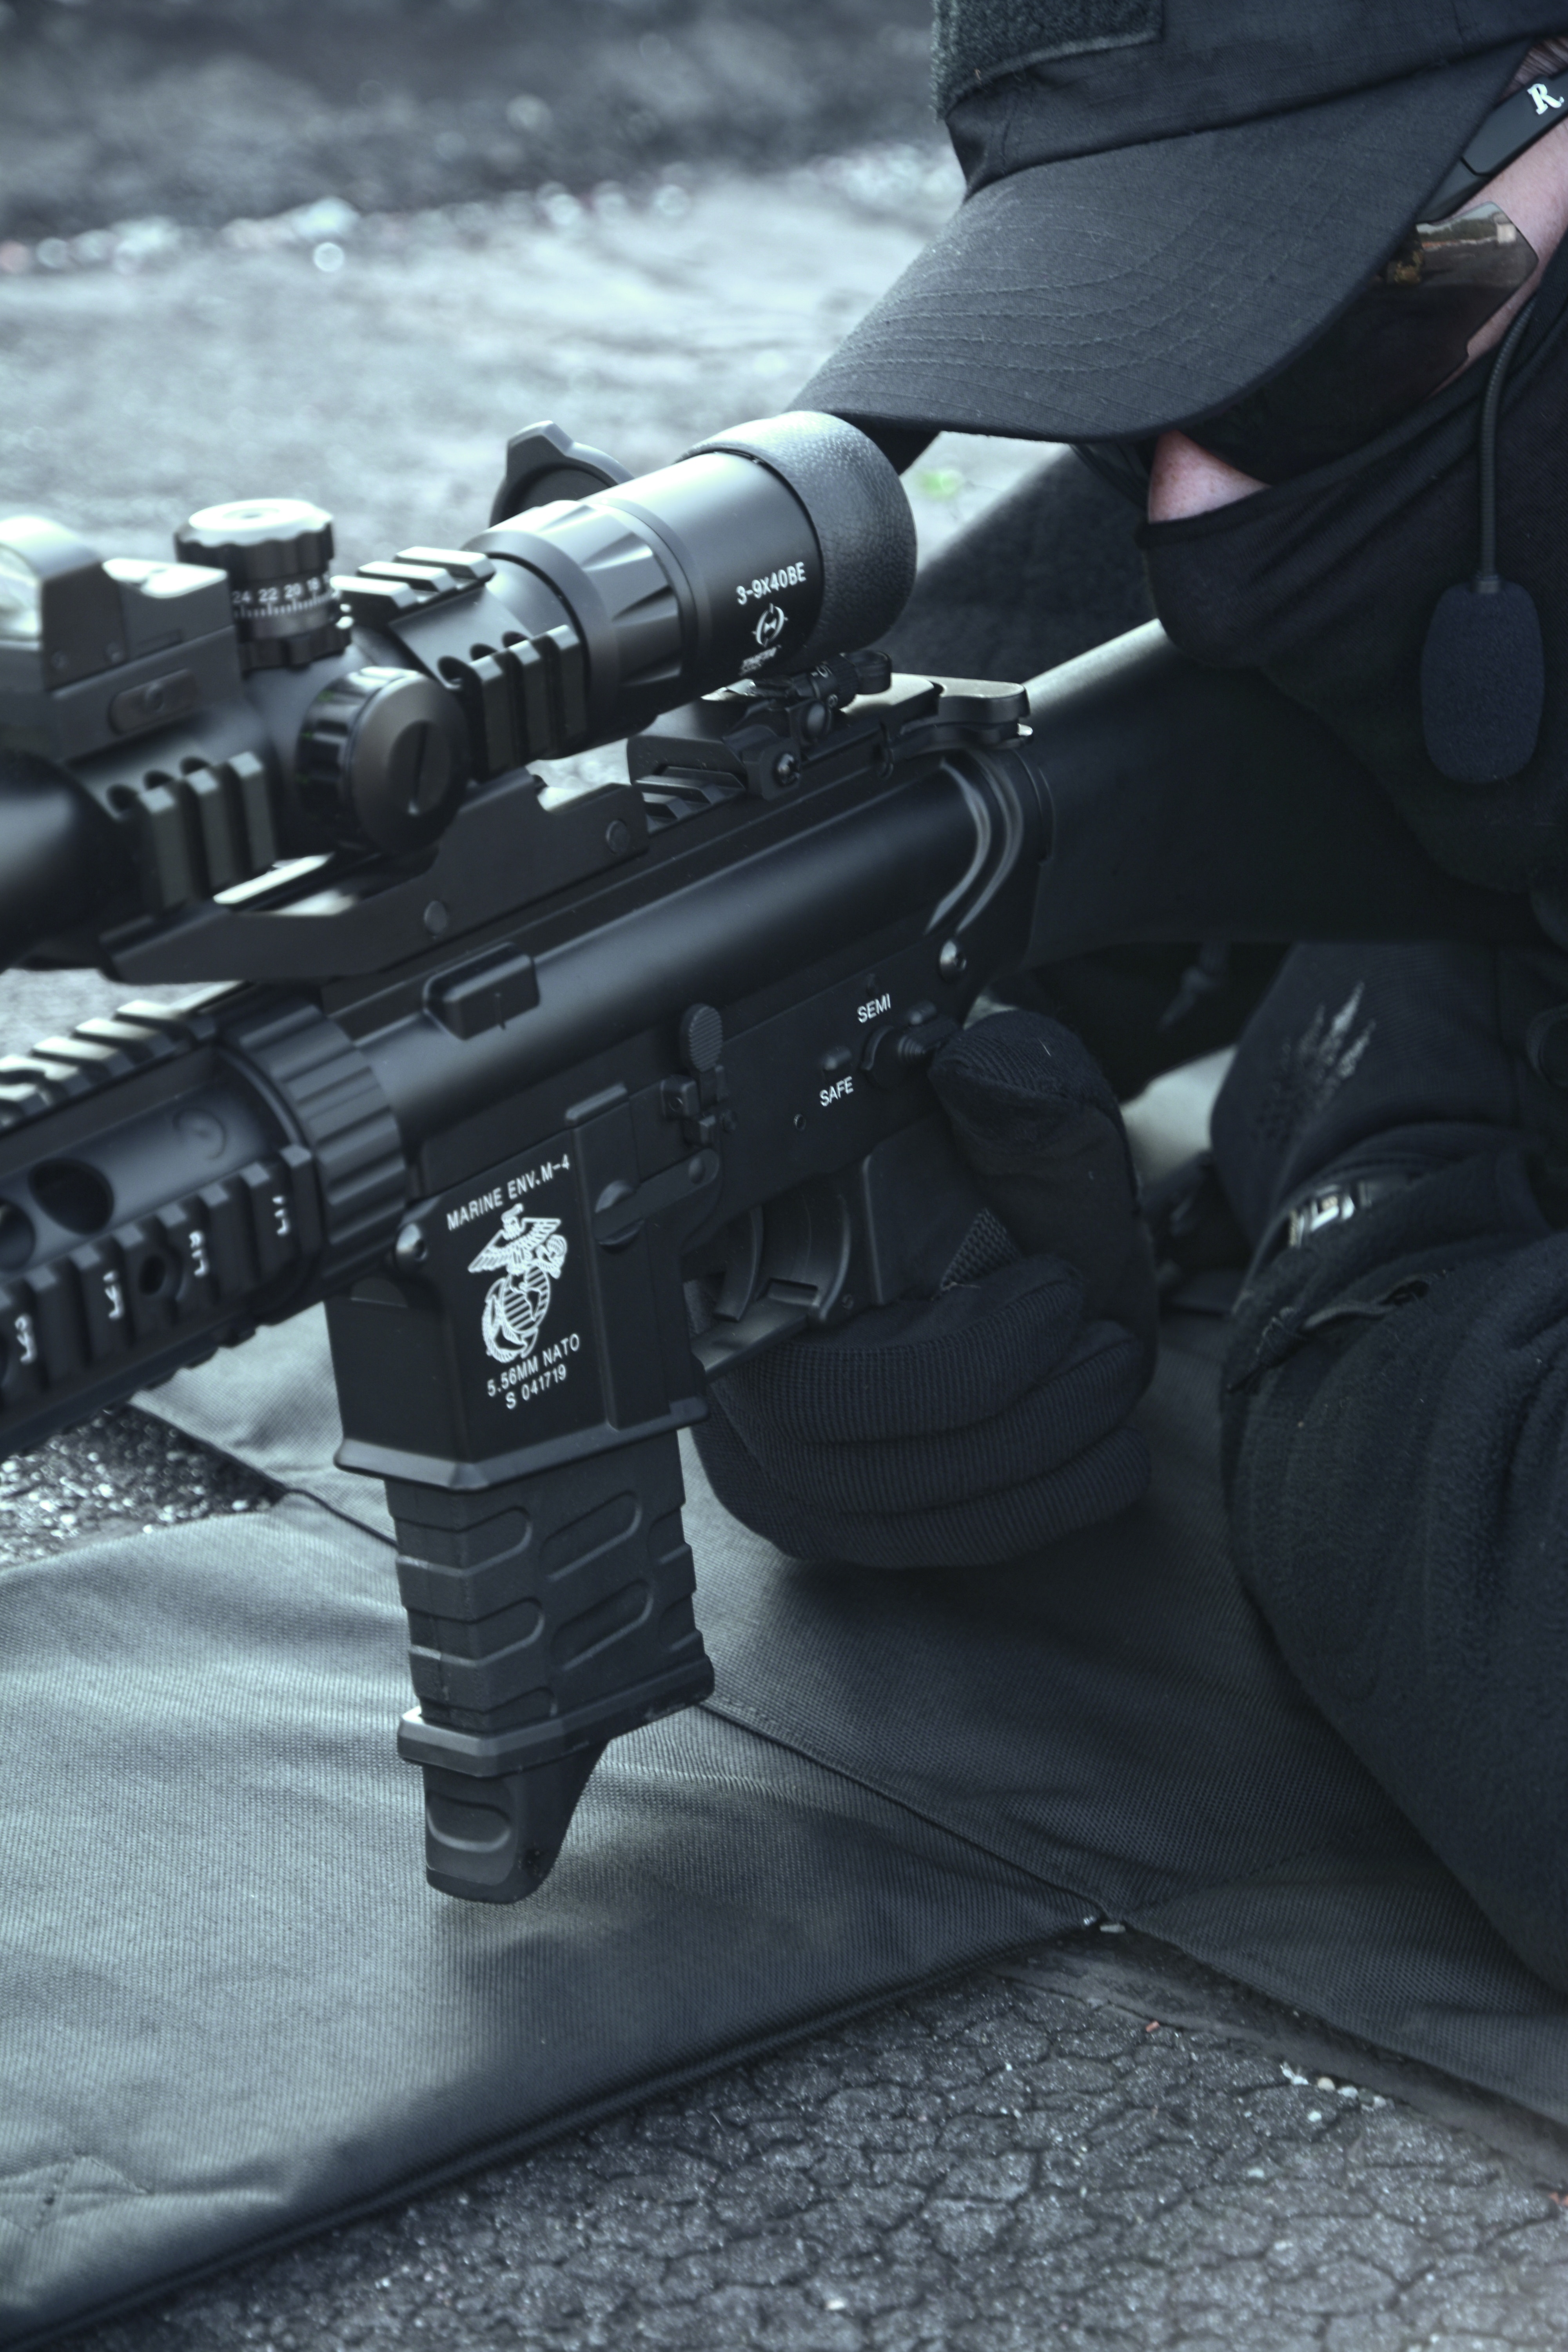 close-up photo of a scope attached to a rifle which a man is holding